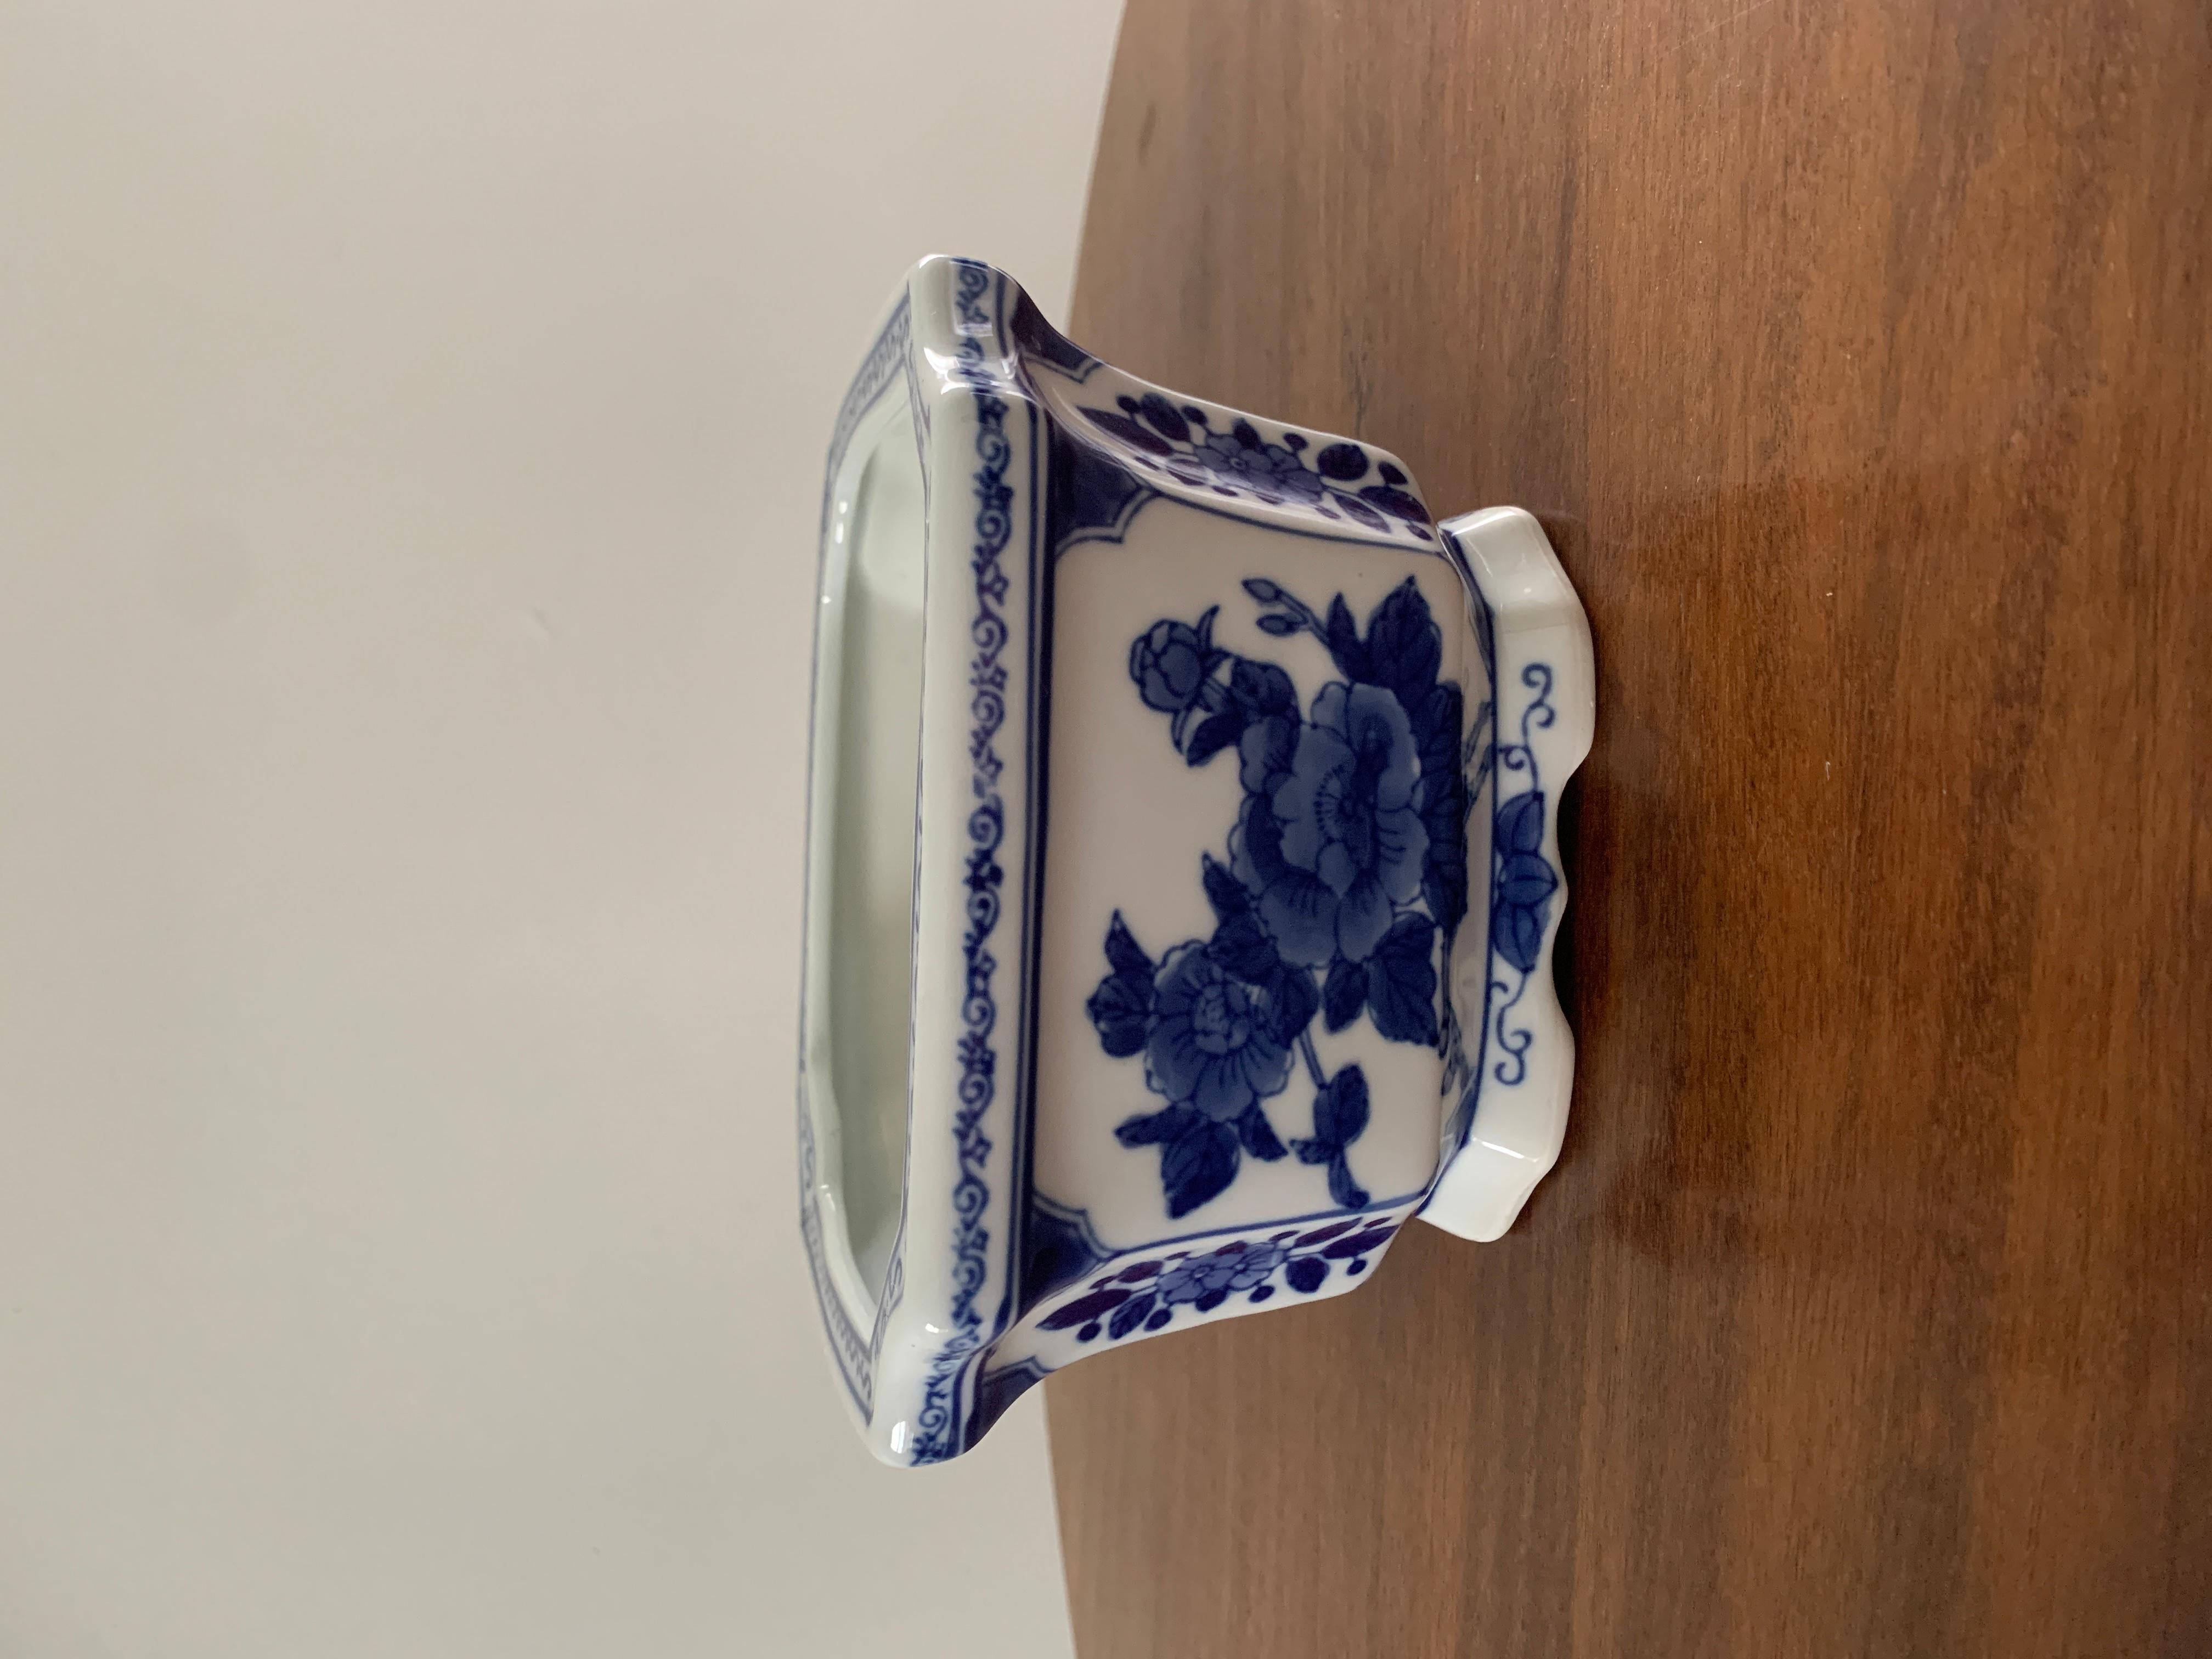 A gorgeous Chinoiserie blue and white porcelain cachepot planter

Circa late 20th century

Measures: 7